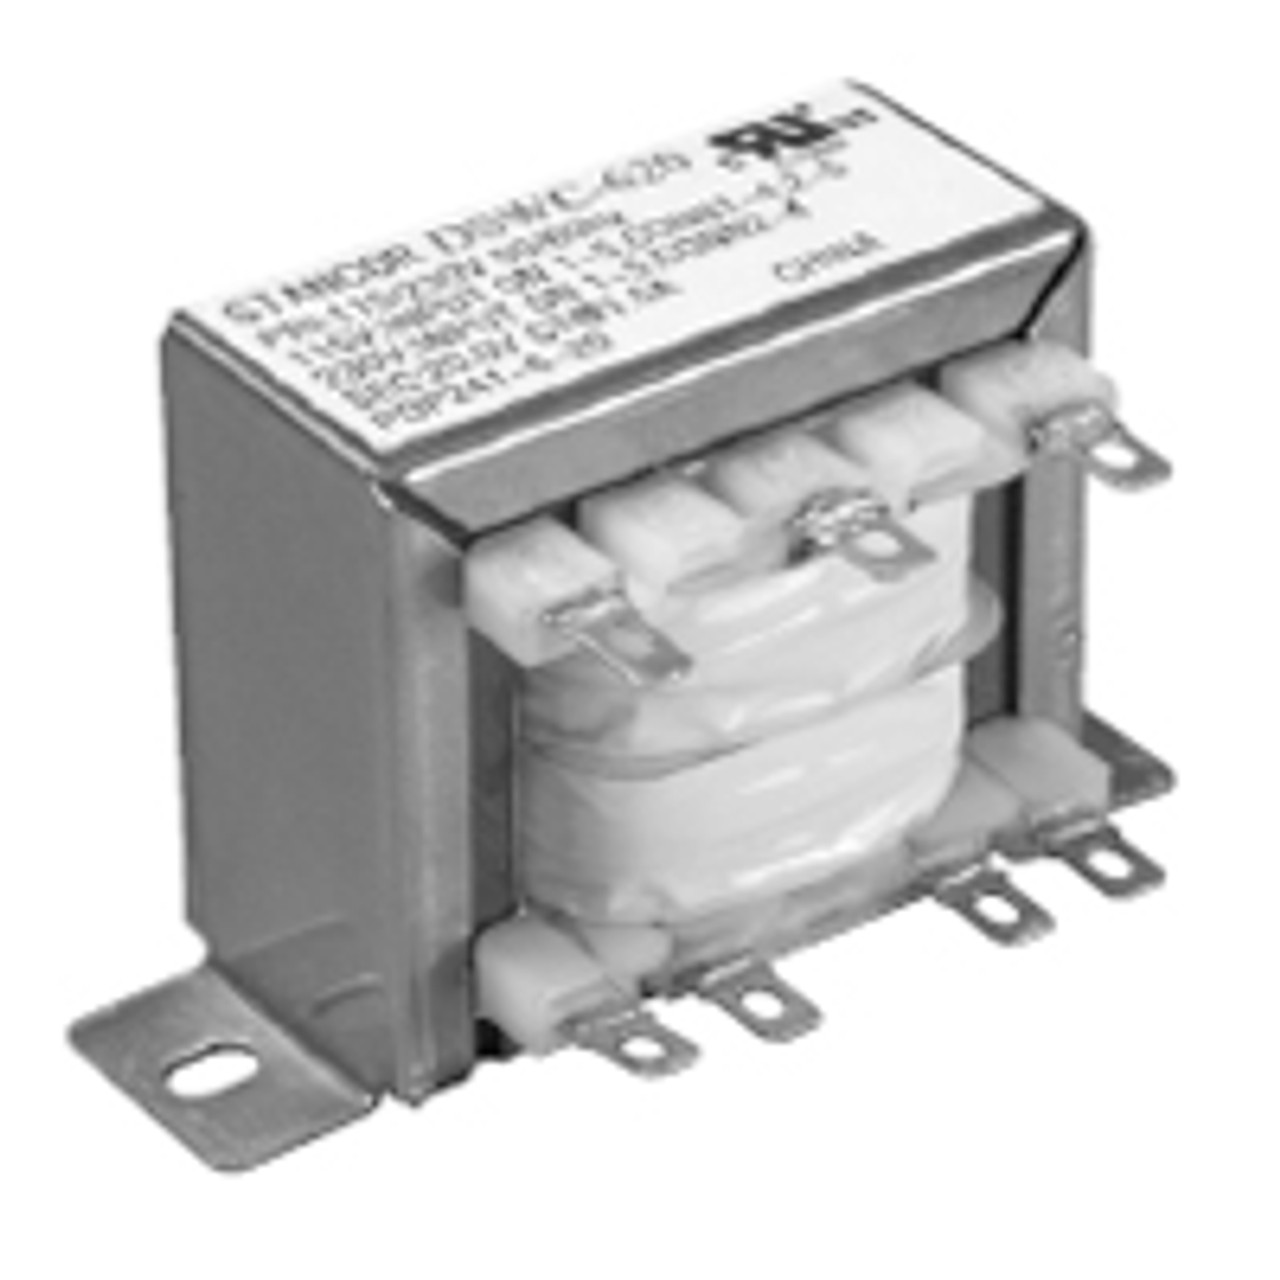 Stancor / White Rodgers DSWC-424 Chassis Mount Power Transformers